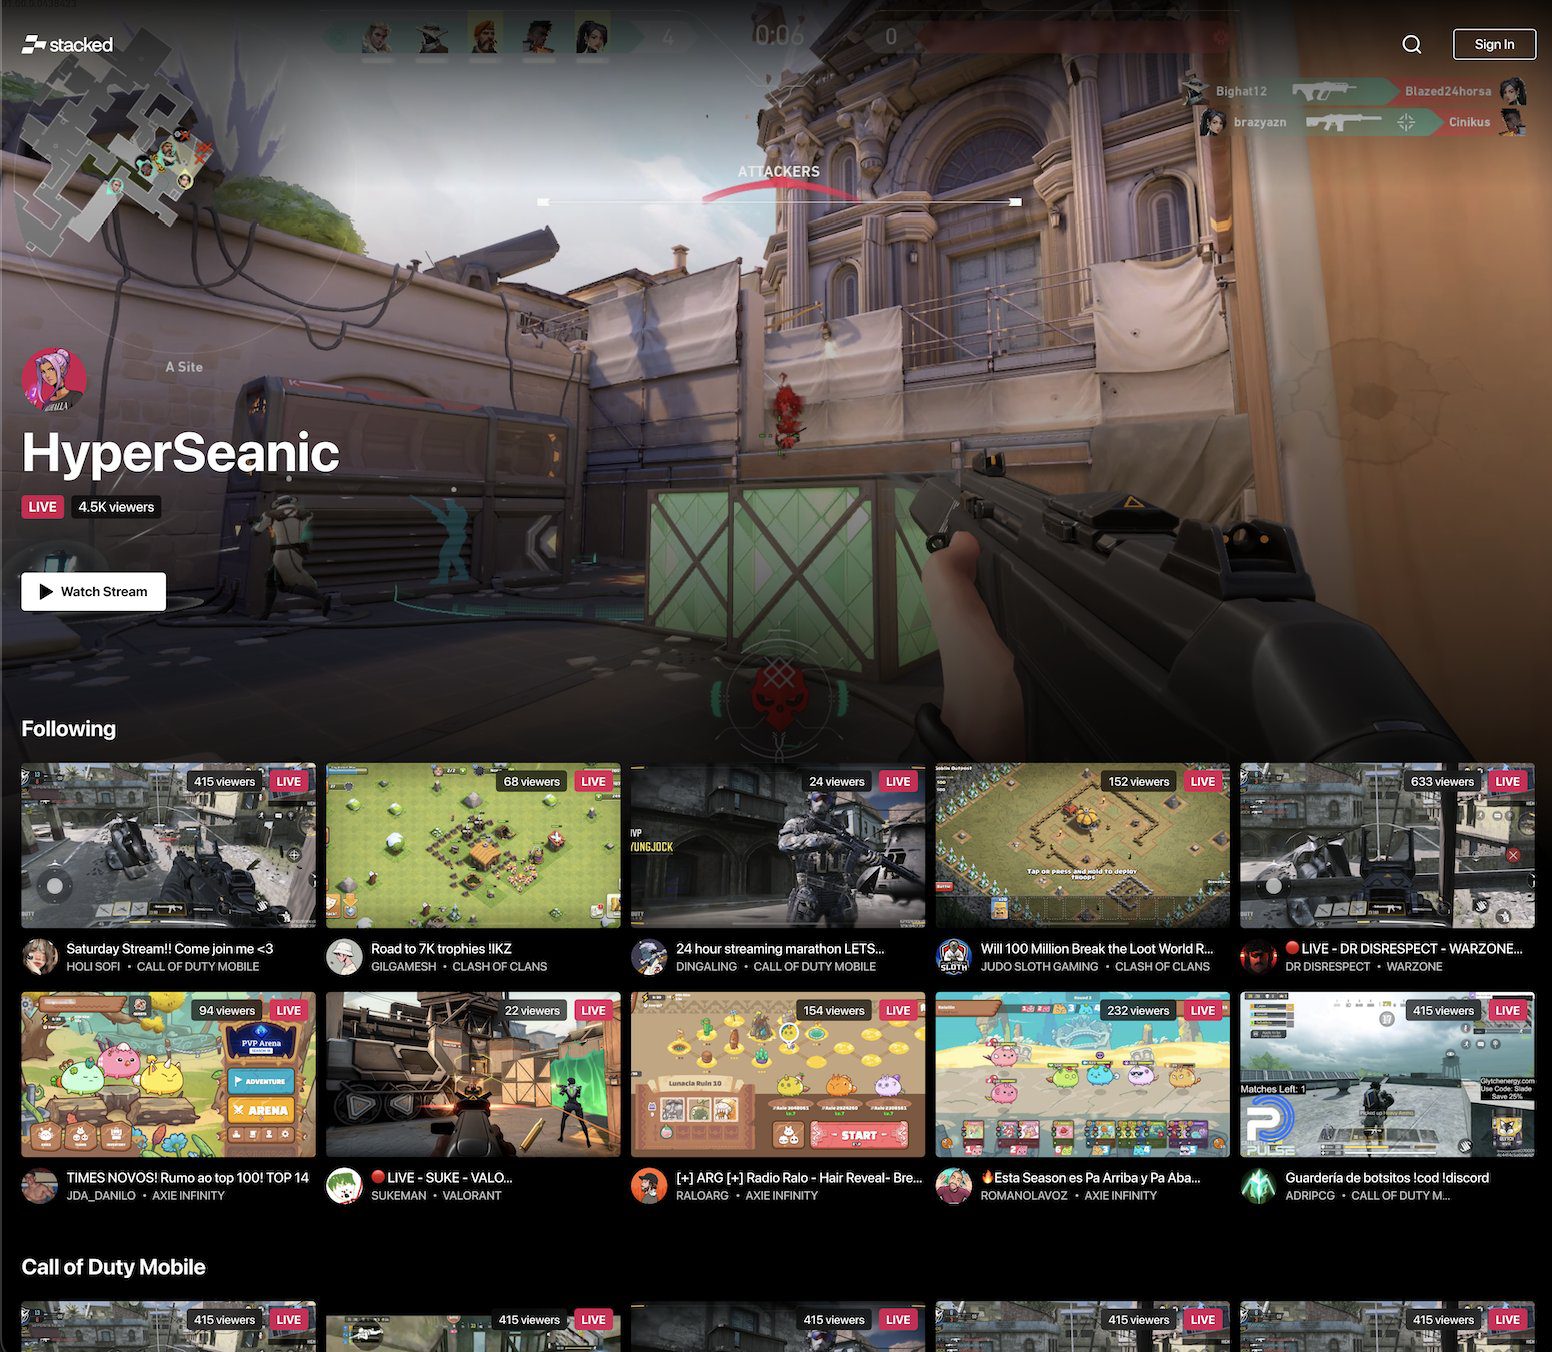 Stacked: the web3 alternative to twitch raises $13m